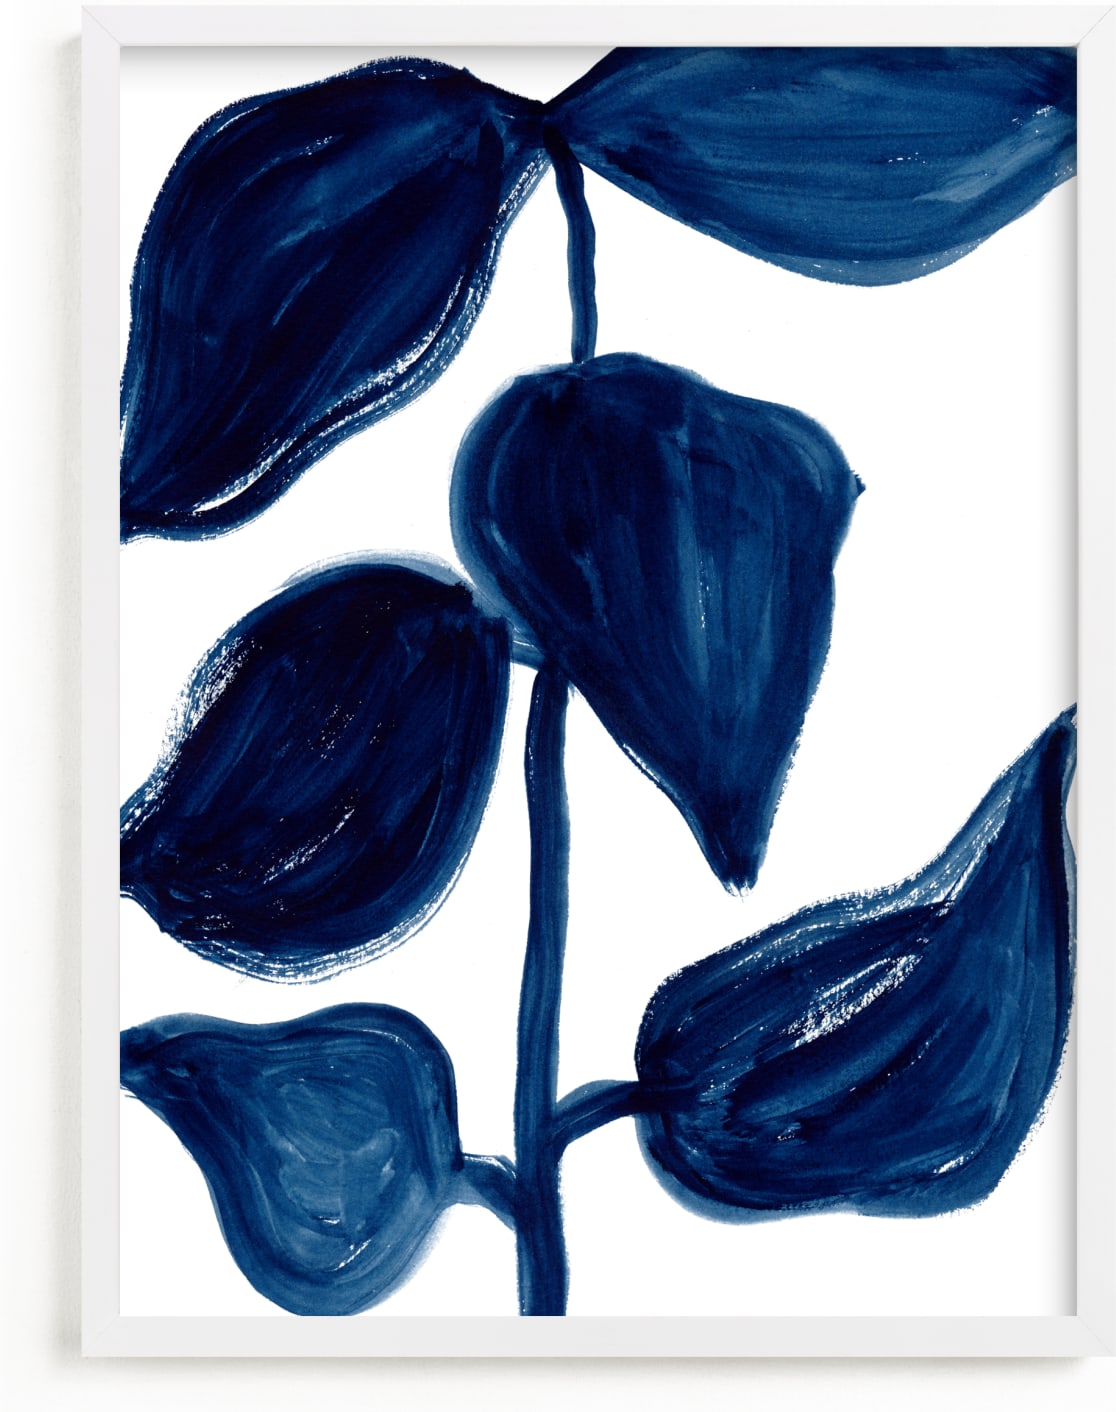 This is a blue art by flvx studio called Indigo Plant.